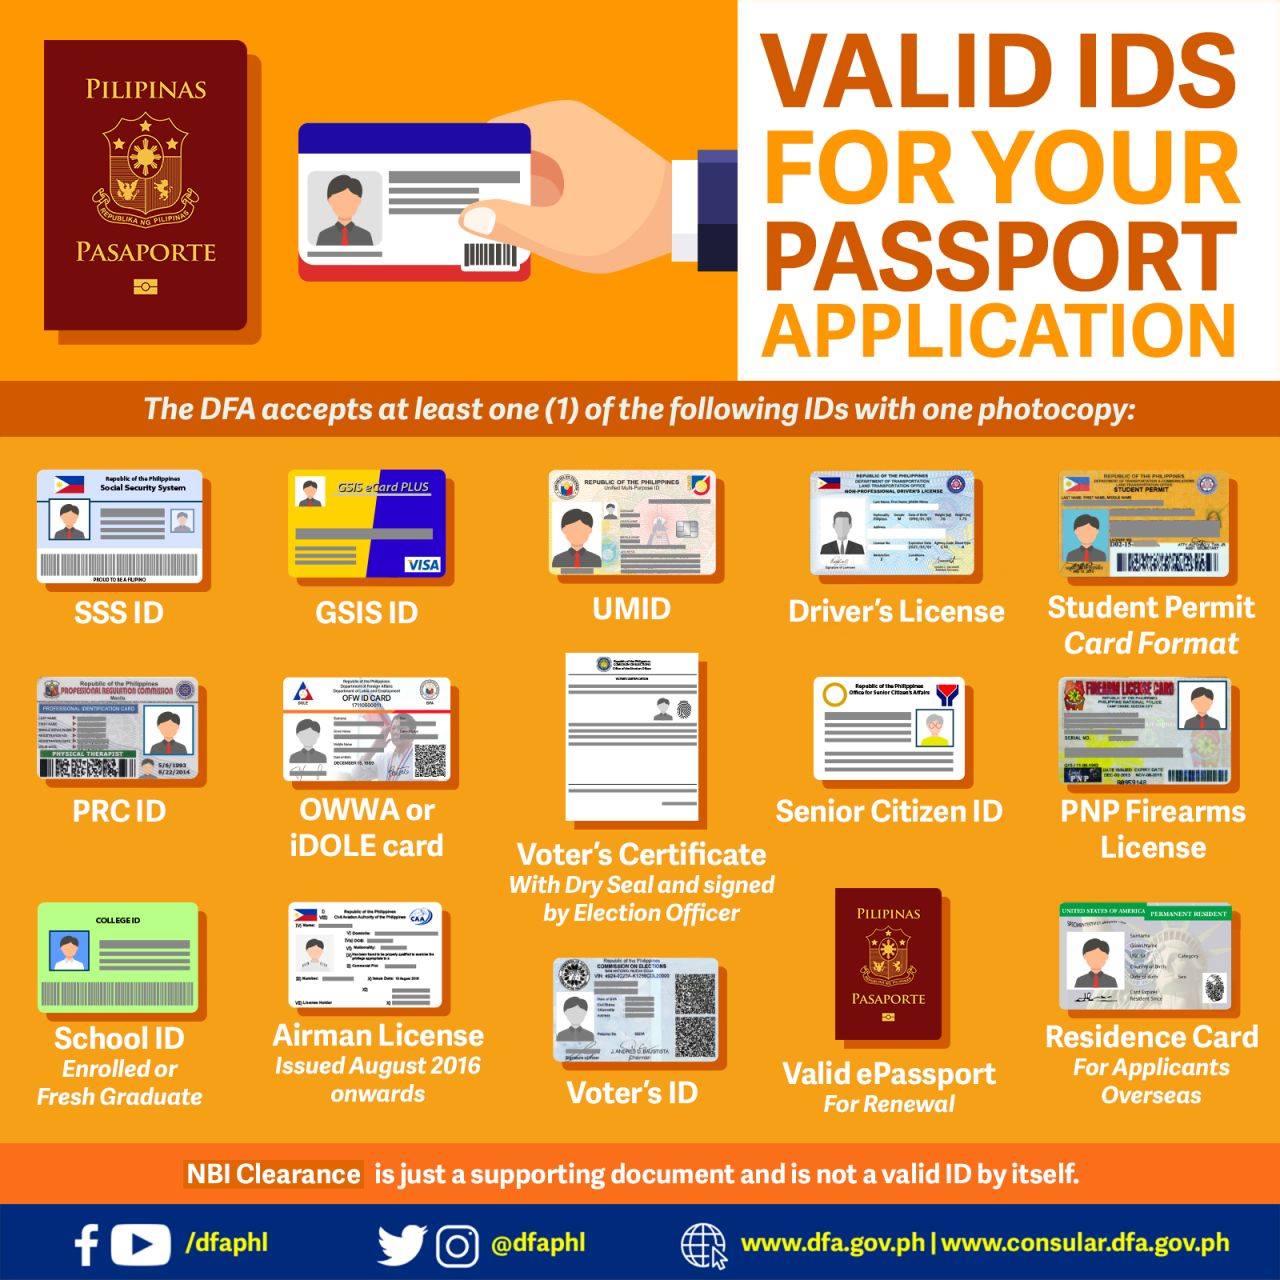 dfa accepted valid id for passport